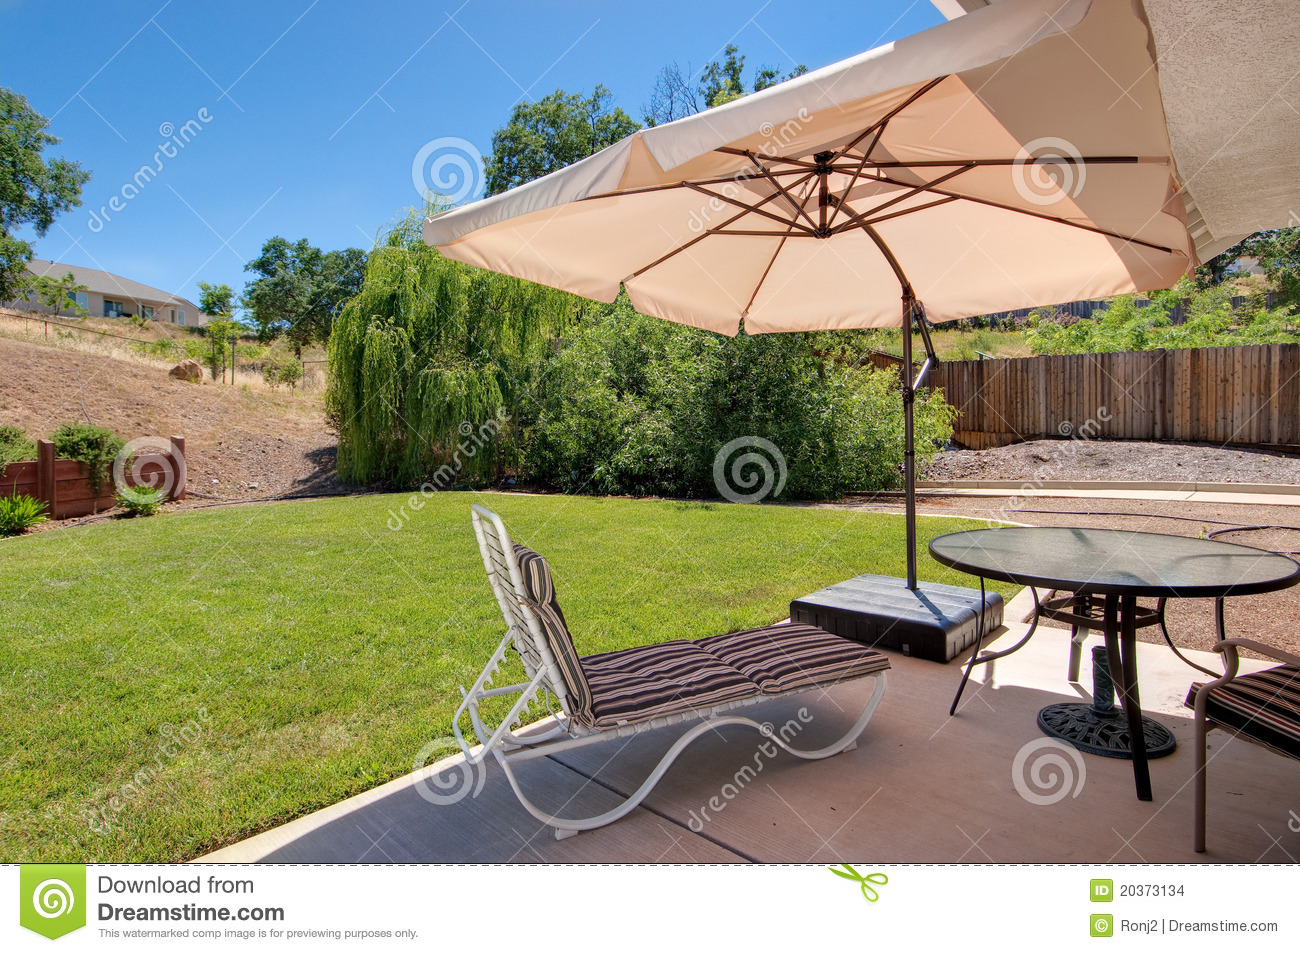     Modern Tract Home Backyard   Porch   Patio Table And Chair Bbq Area